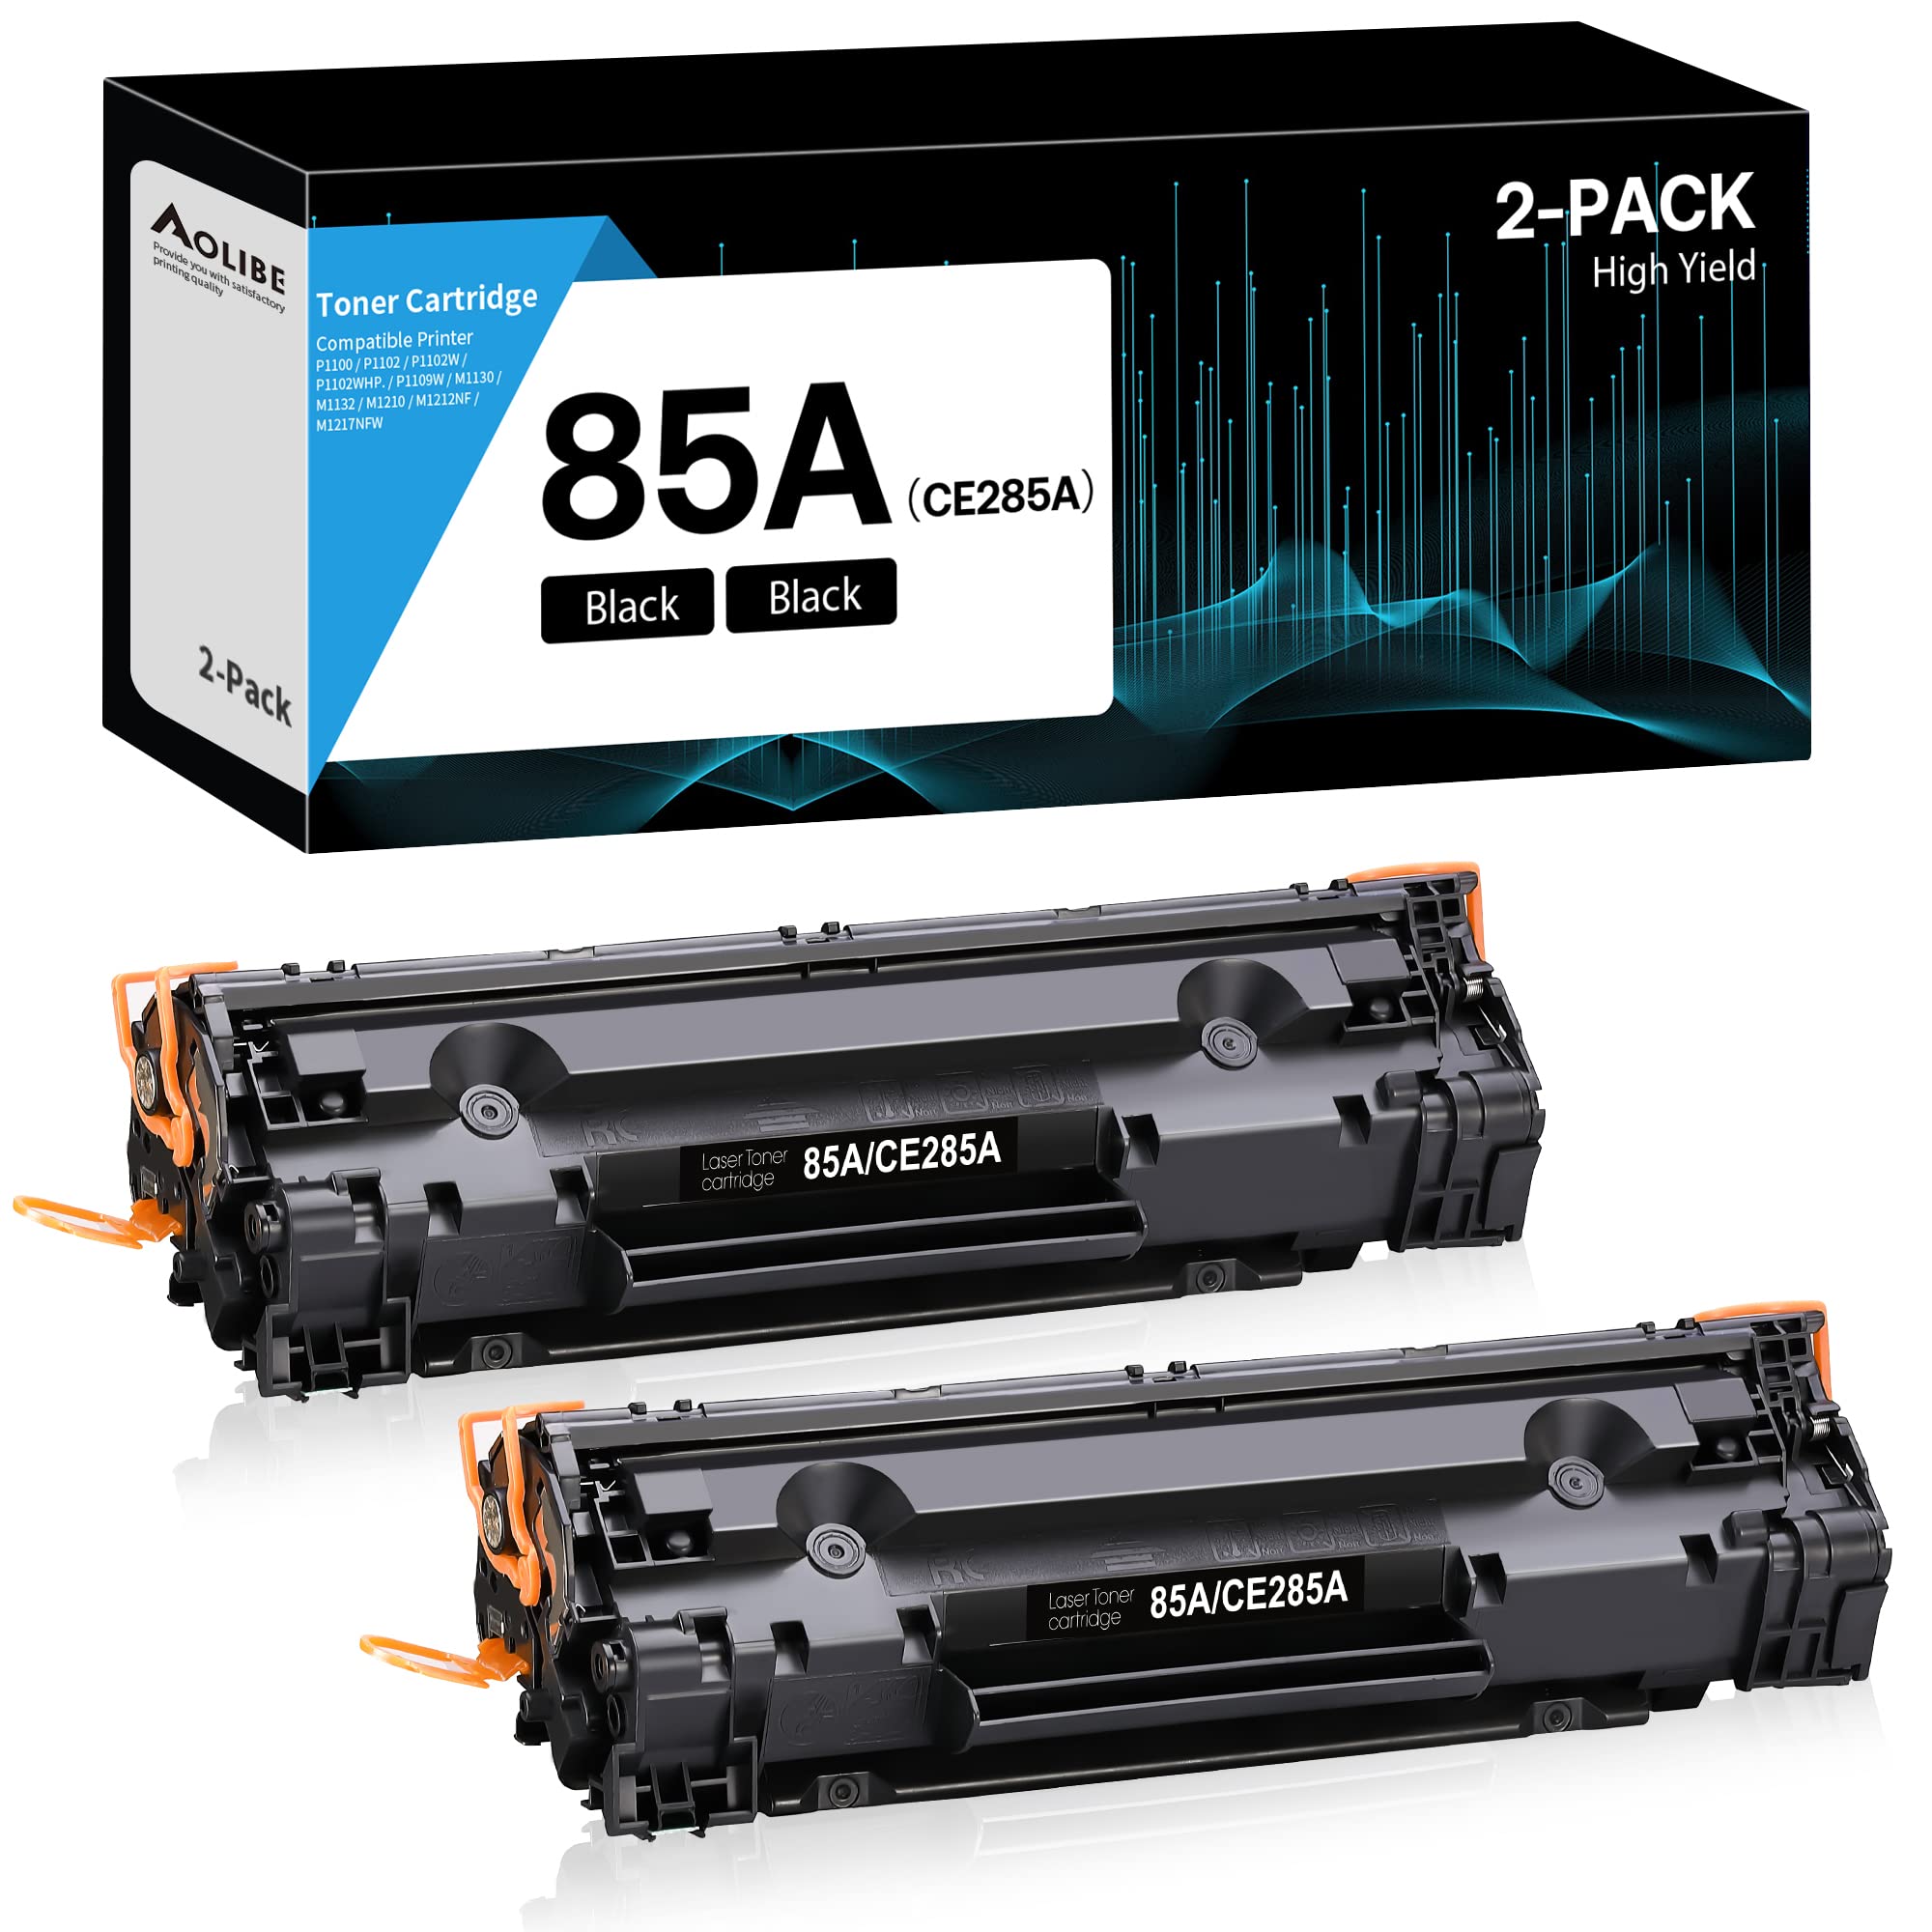 AOLIBE 85A CE285A Black Toner Cartridges (2 Packs) Replacement for CE285A 85A Toner Cartridge for P1102w P1102 P1109W M1217nfw M1212 M1212nf M1217 Pro Printer